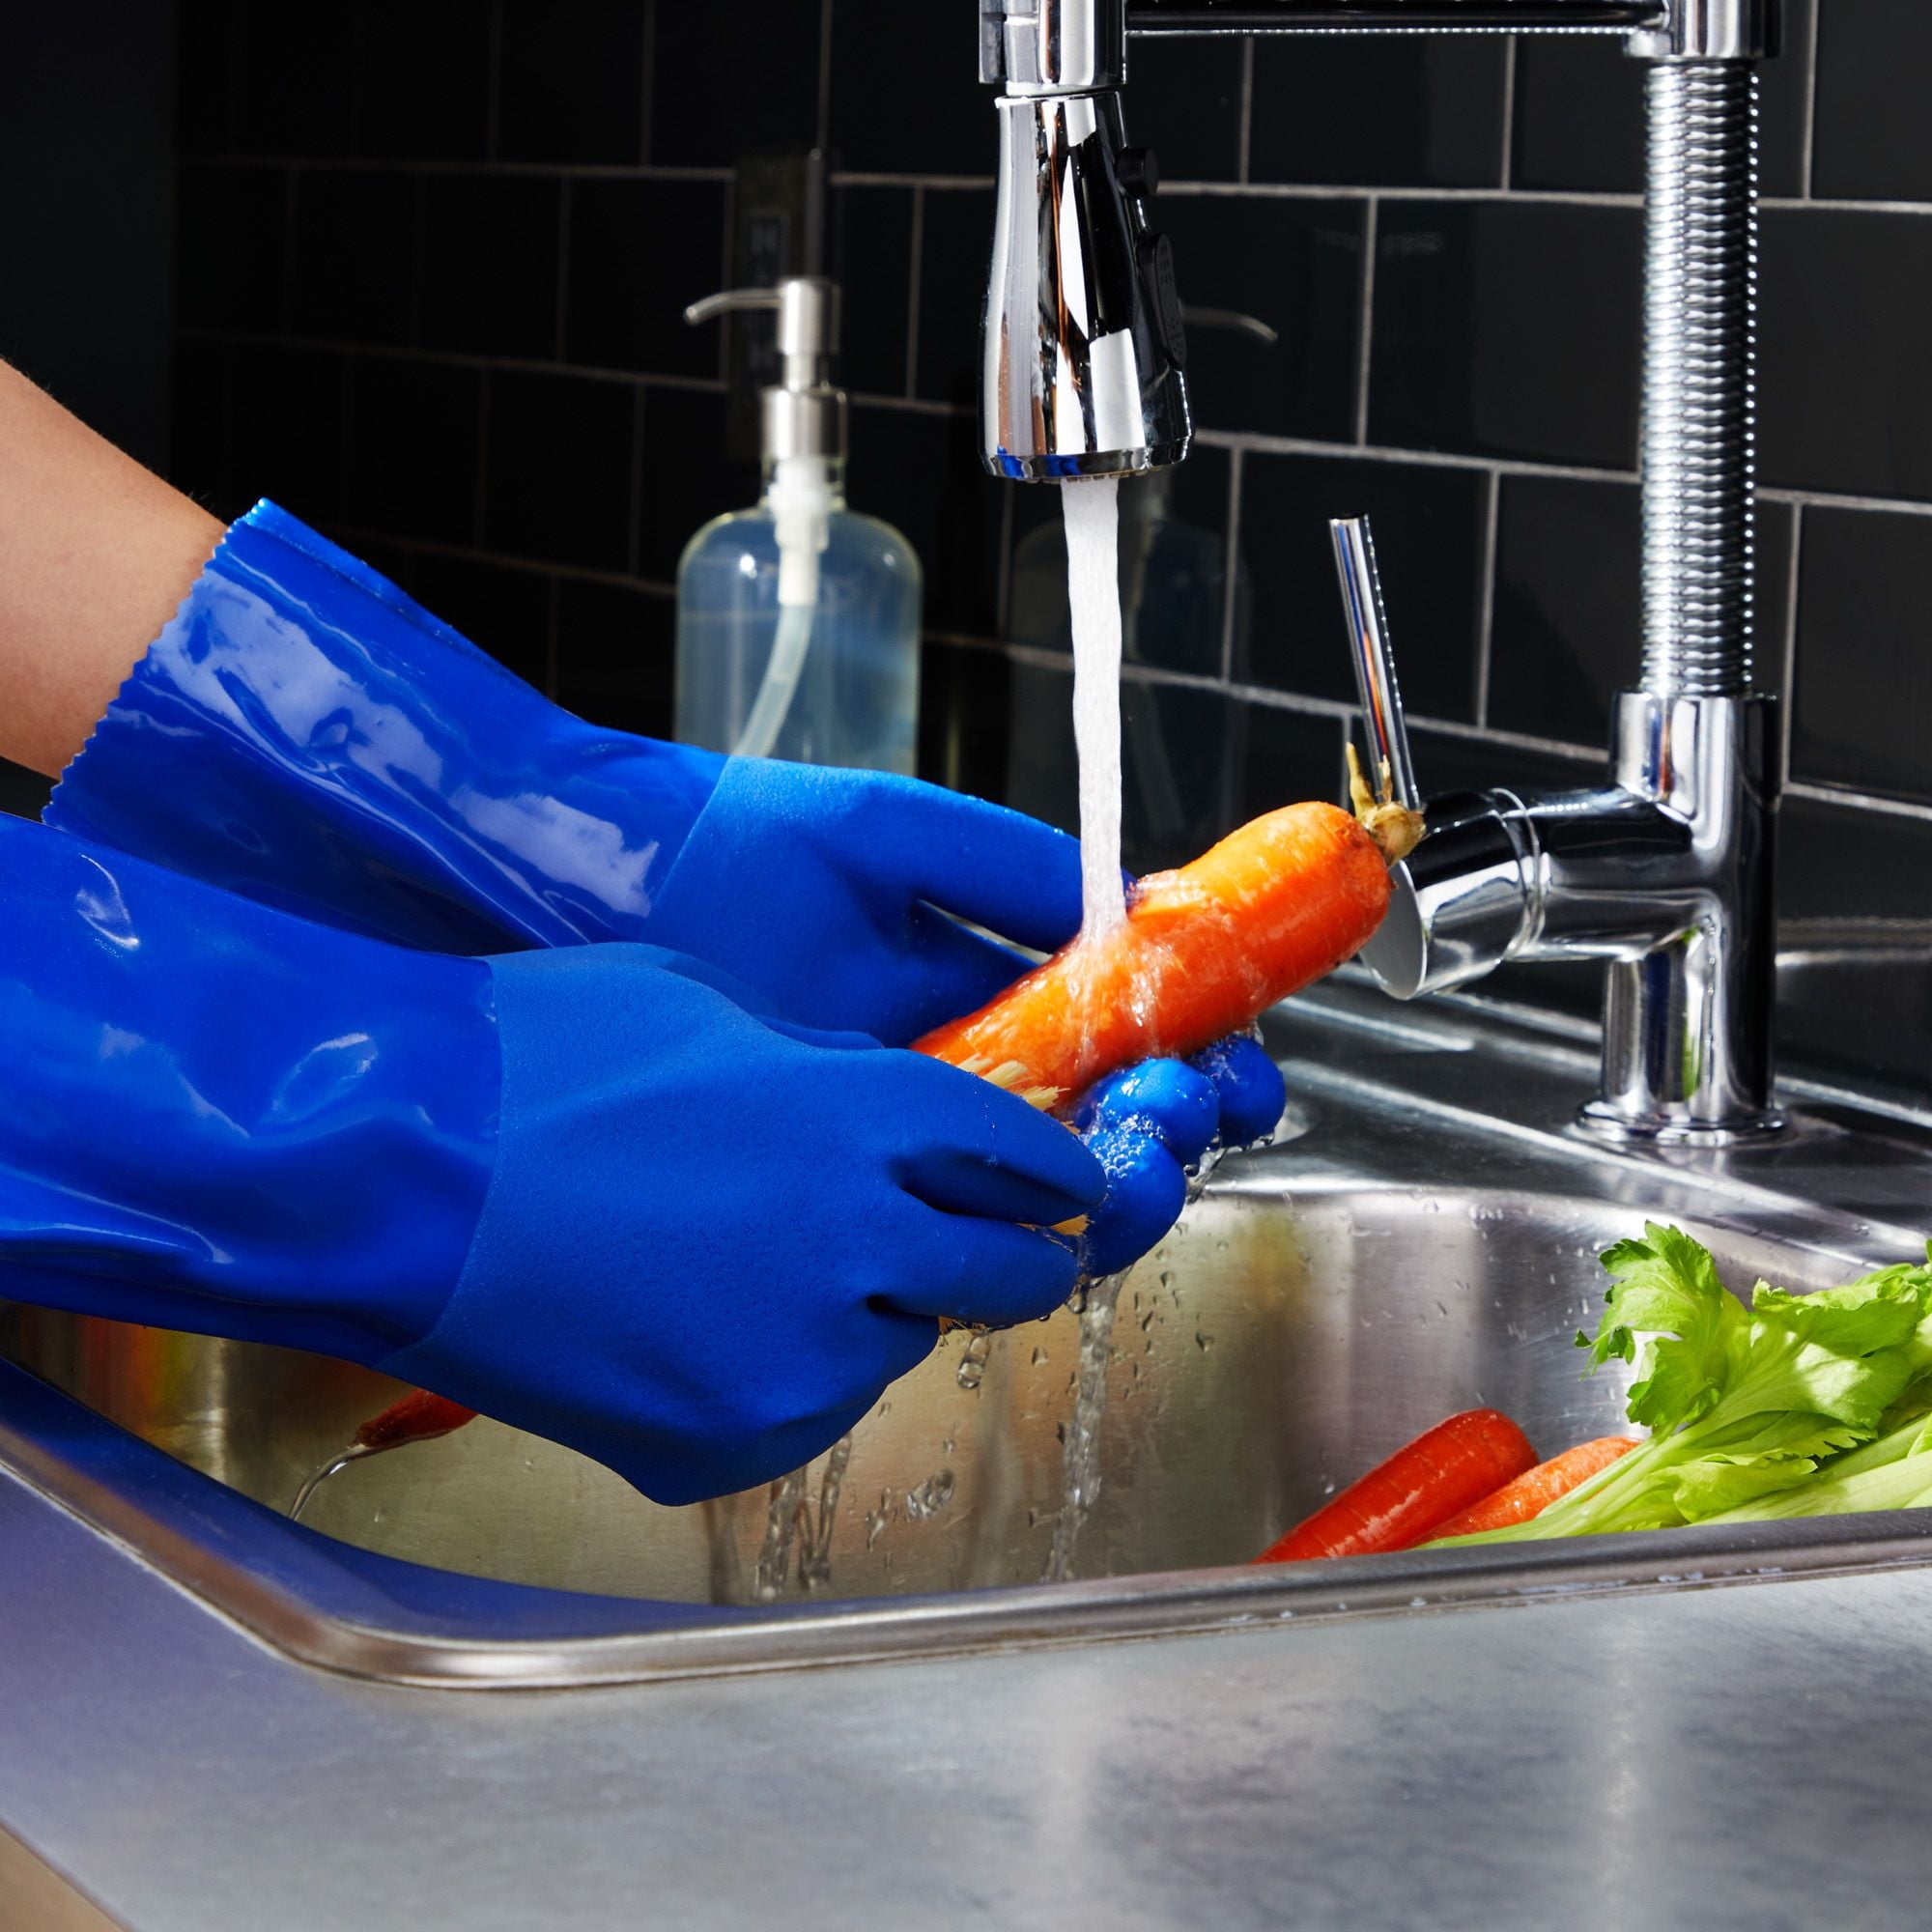 Rubber Household Gloves - Cotton Lined Dishwashing Kitchen Gloves (2 Pair,  Small) : : Health & Personal Care